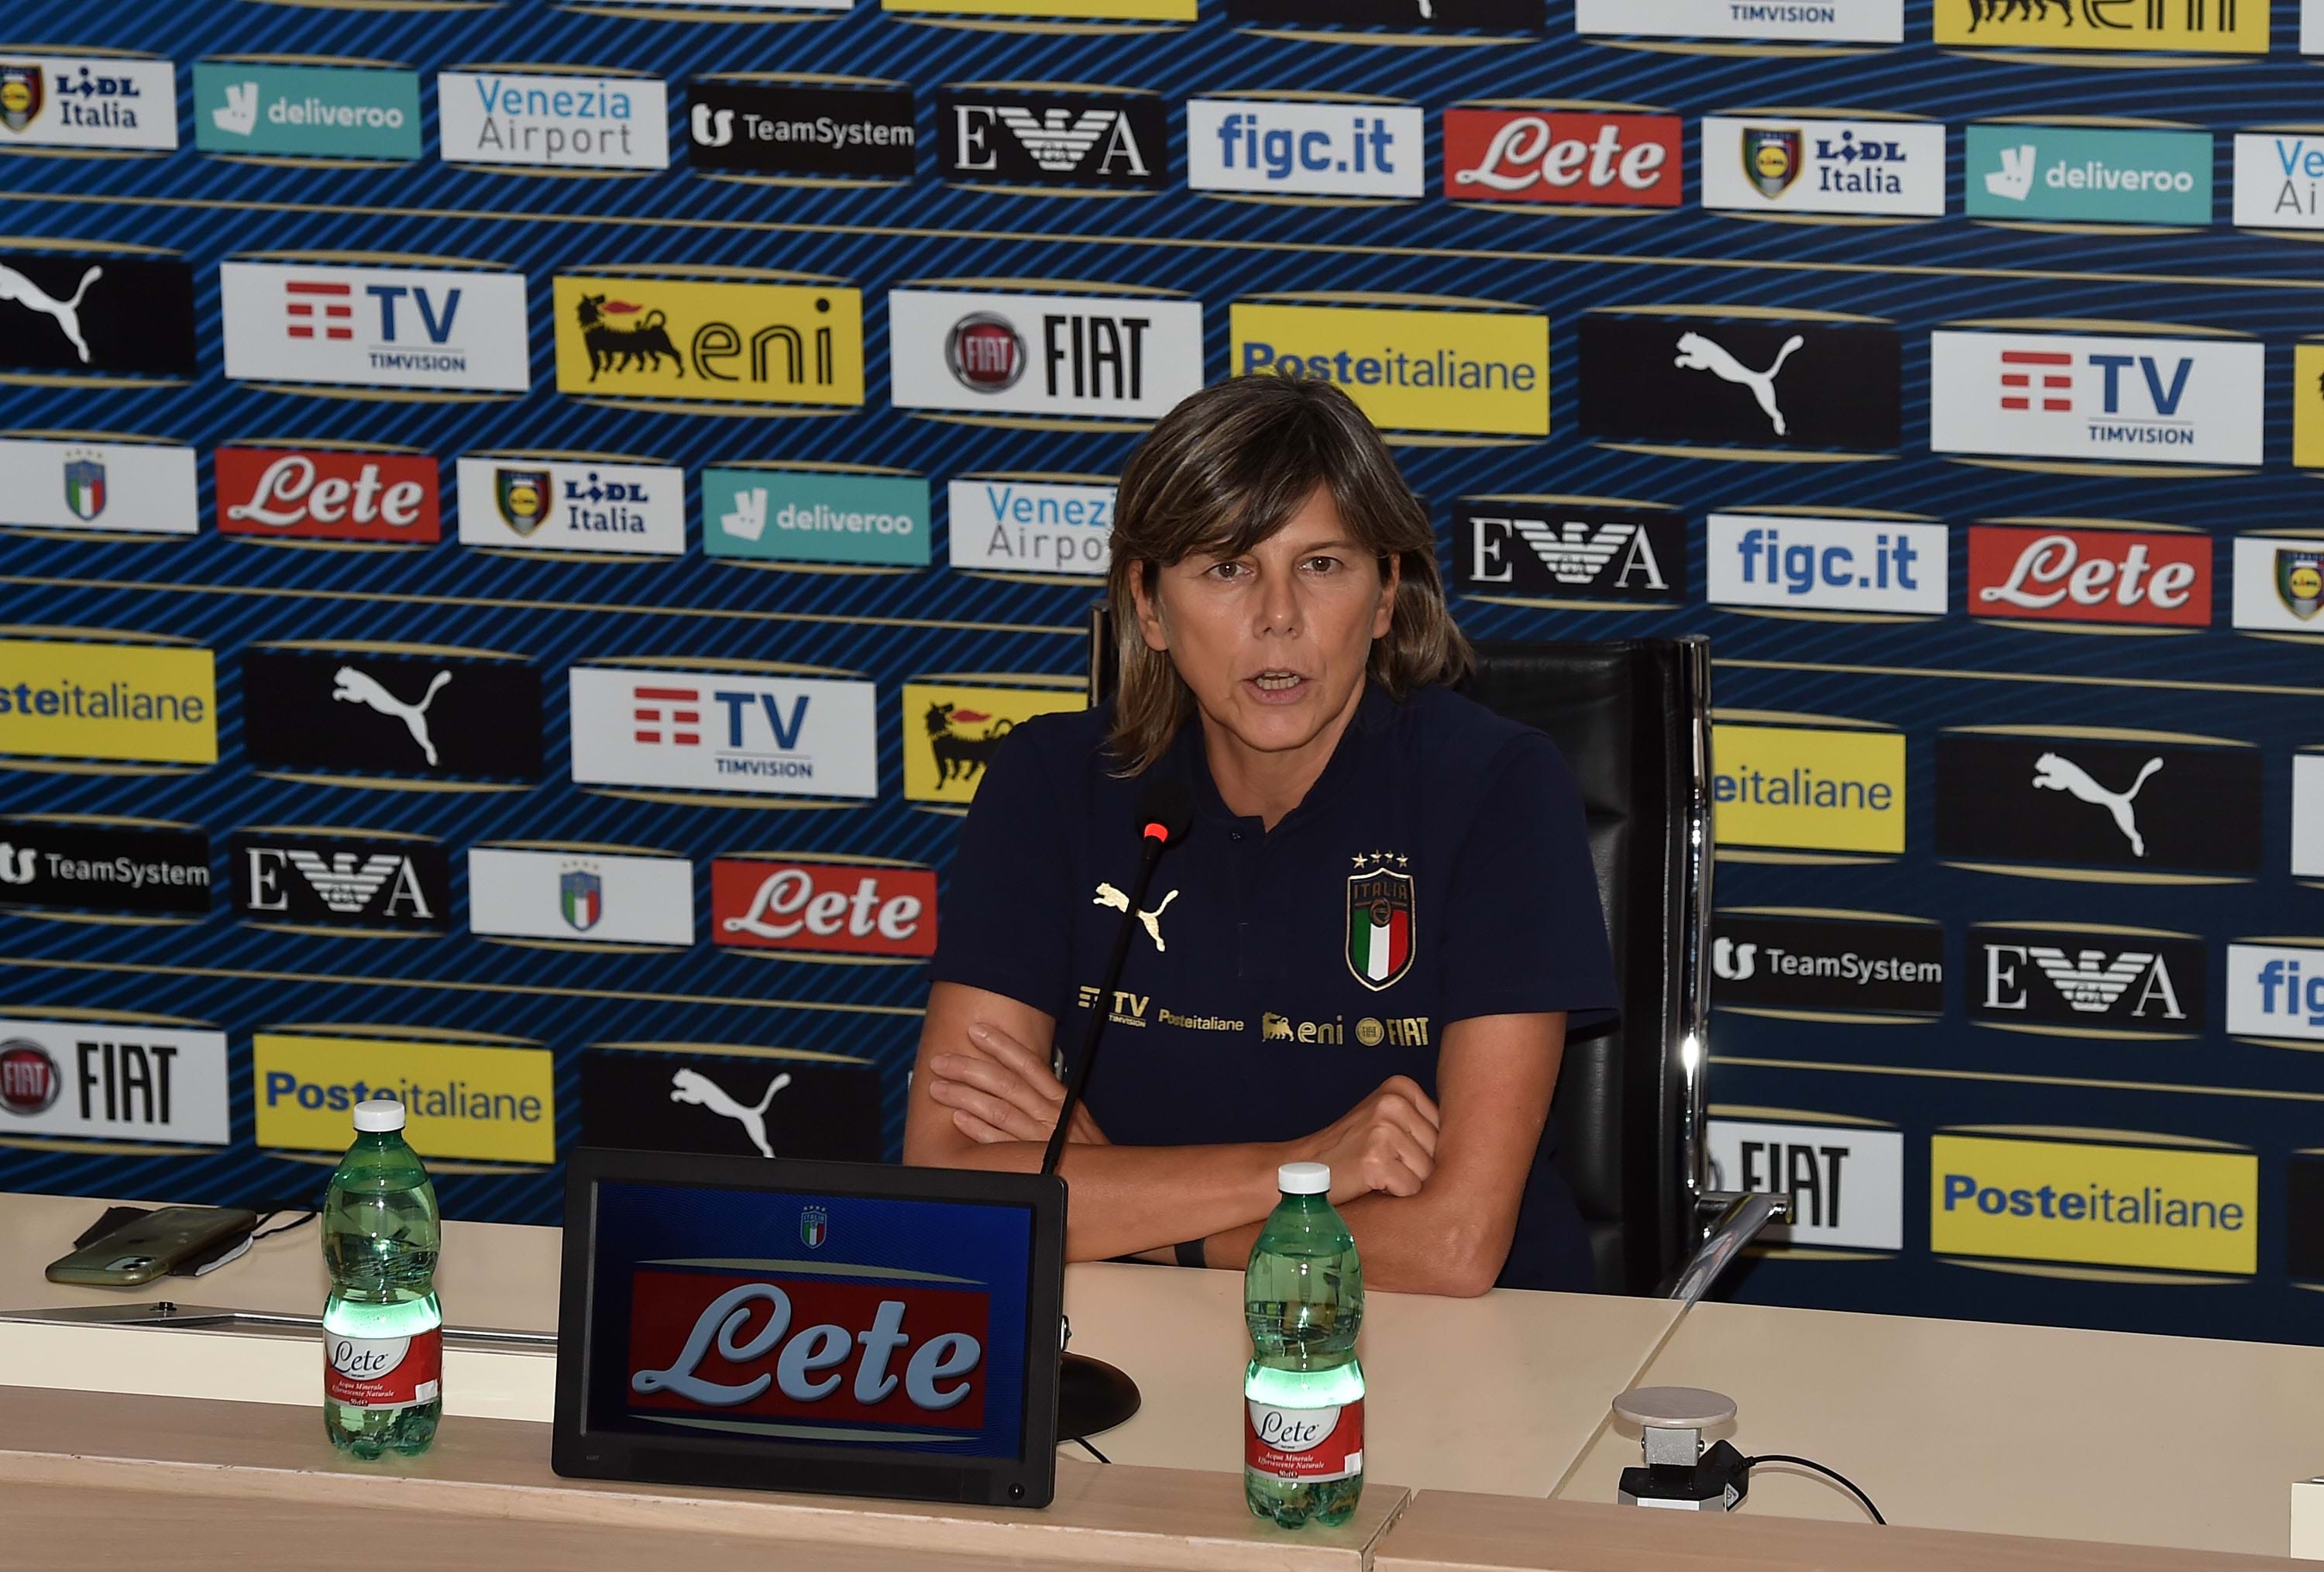 The Azzurre set to begin their World Cup qualifying campaign. Bertolini: “There’s plenty of enthusiasm”